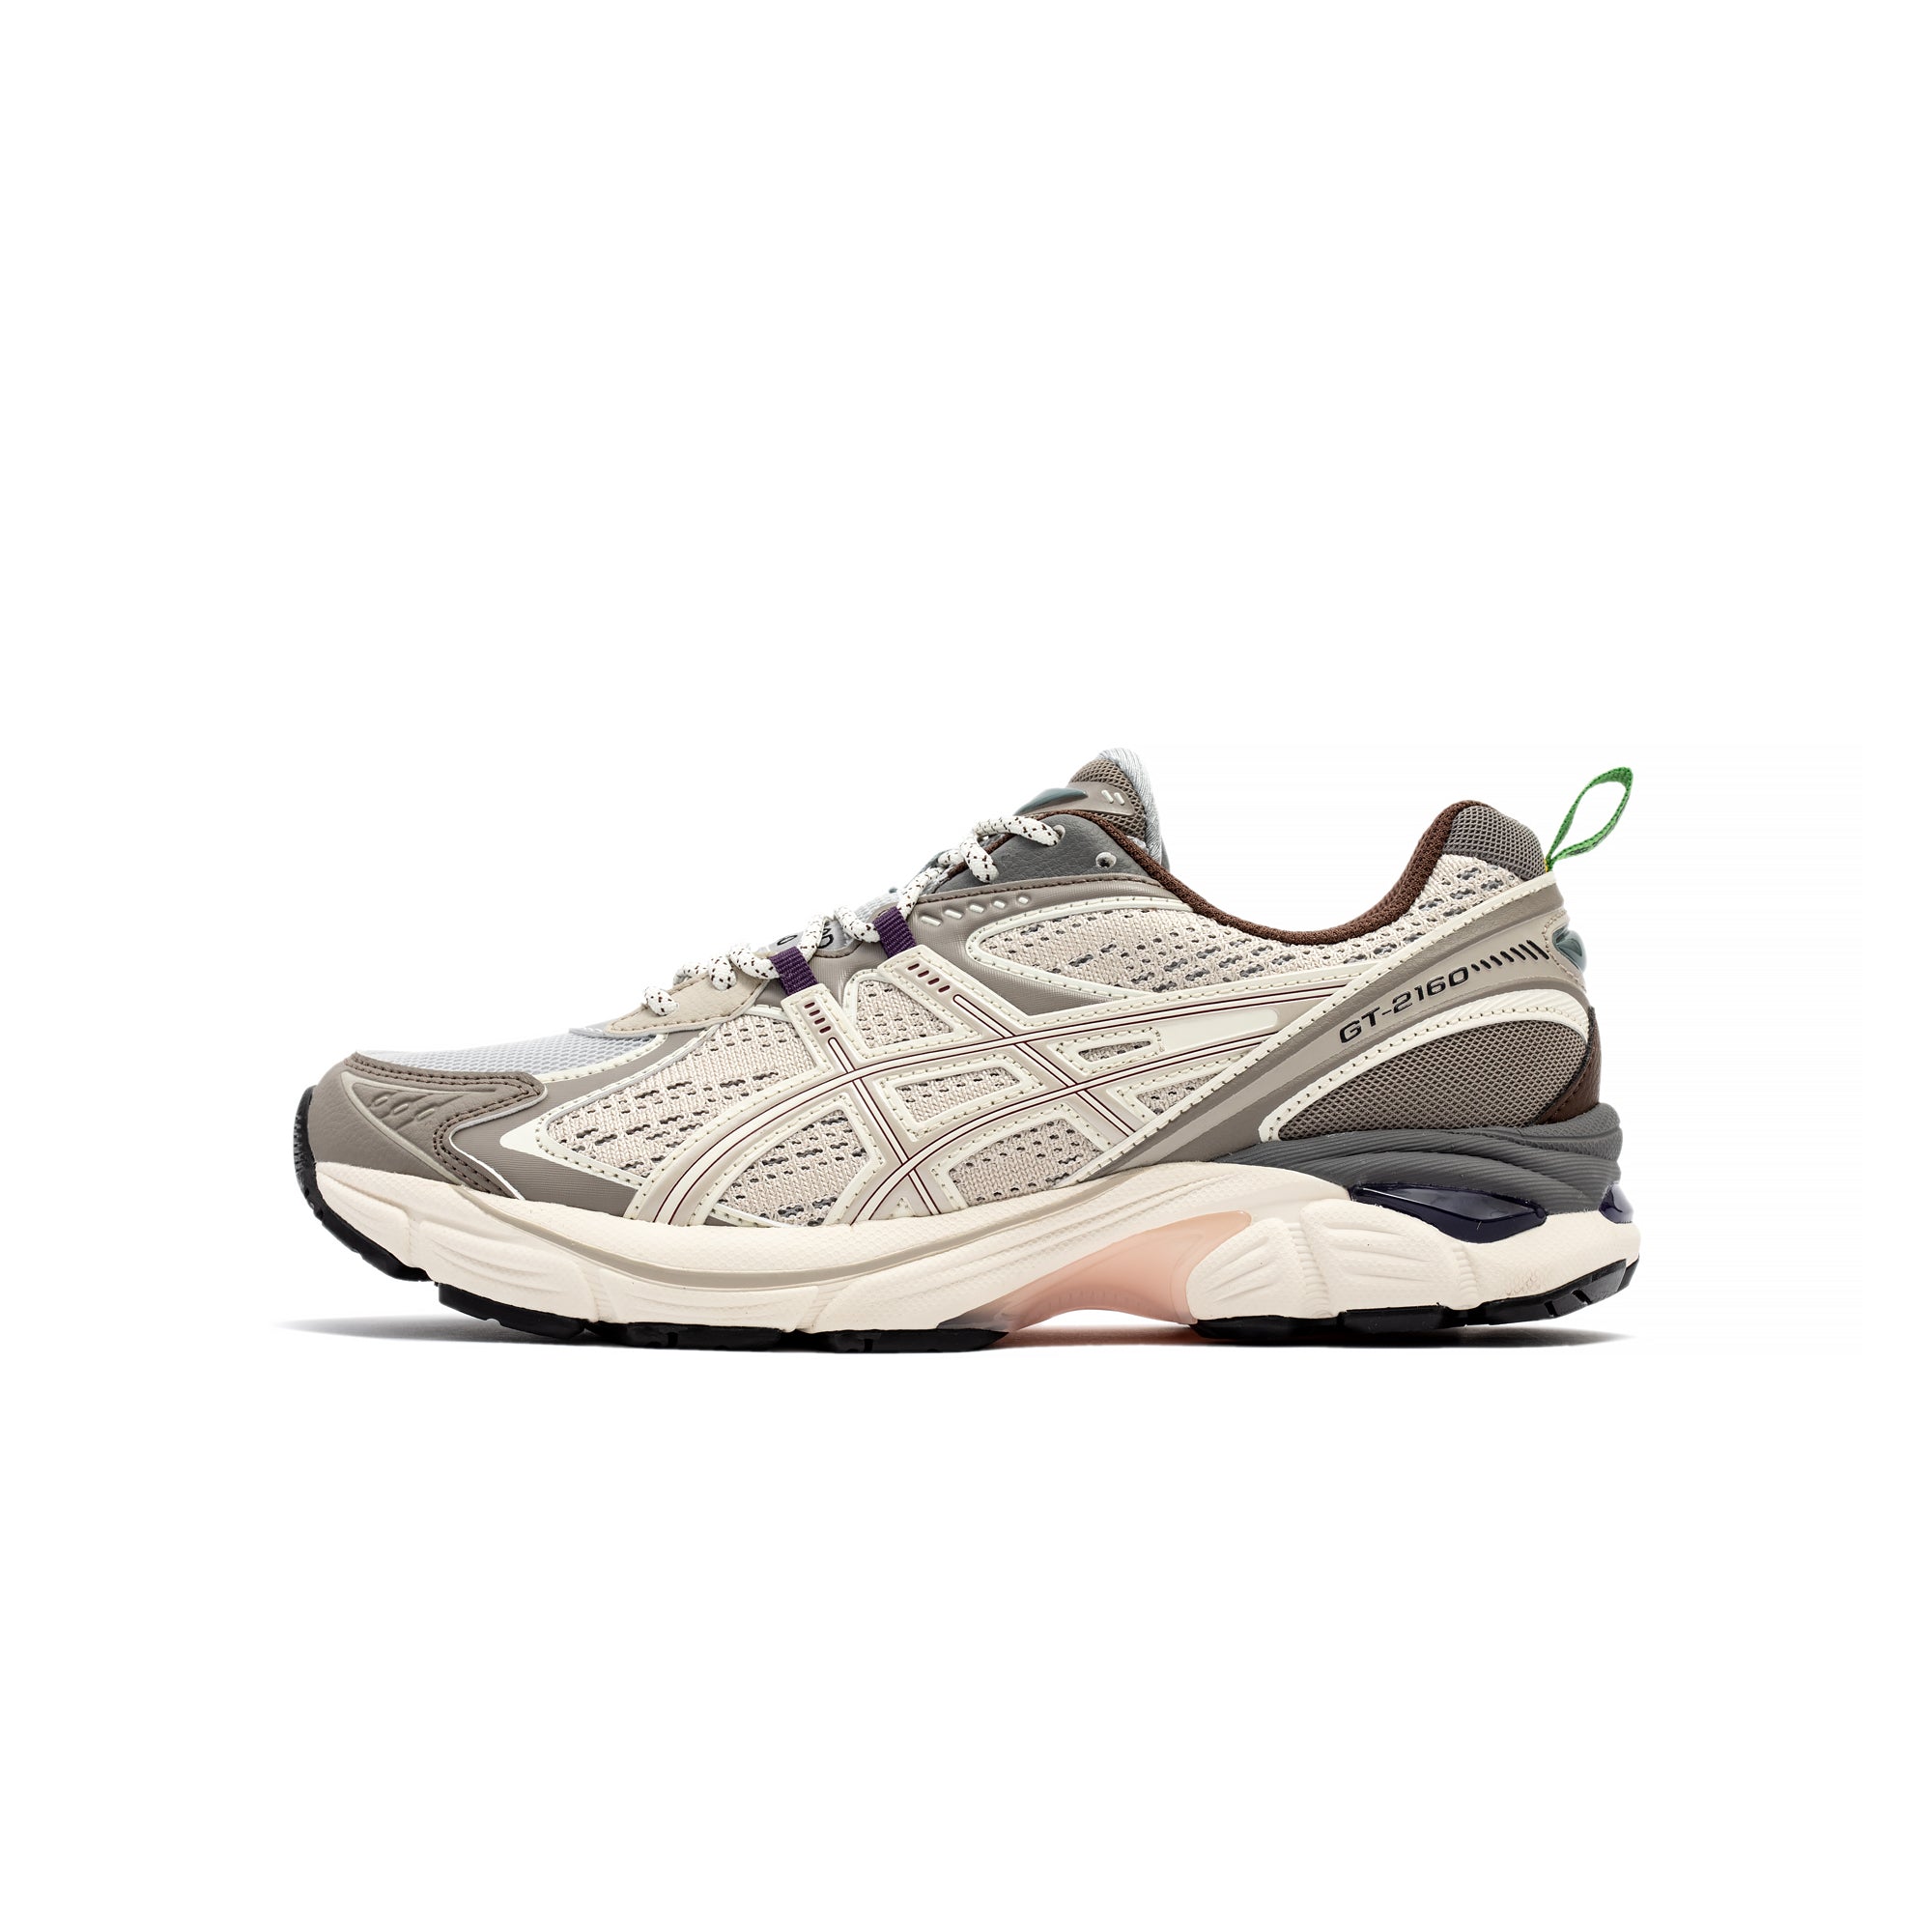 Asics x WOODWOOD GT-2160 Shoes card image